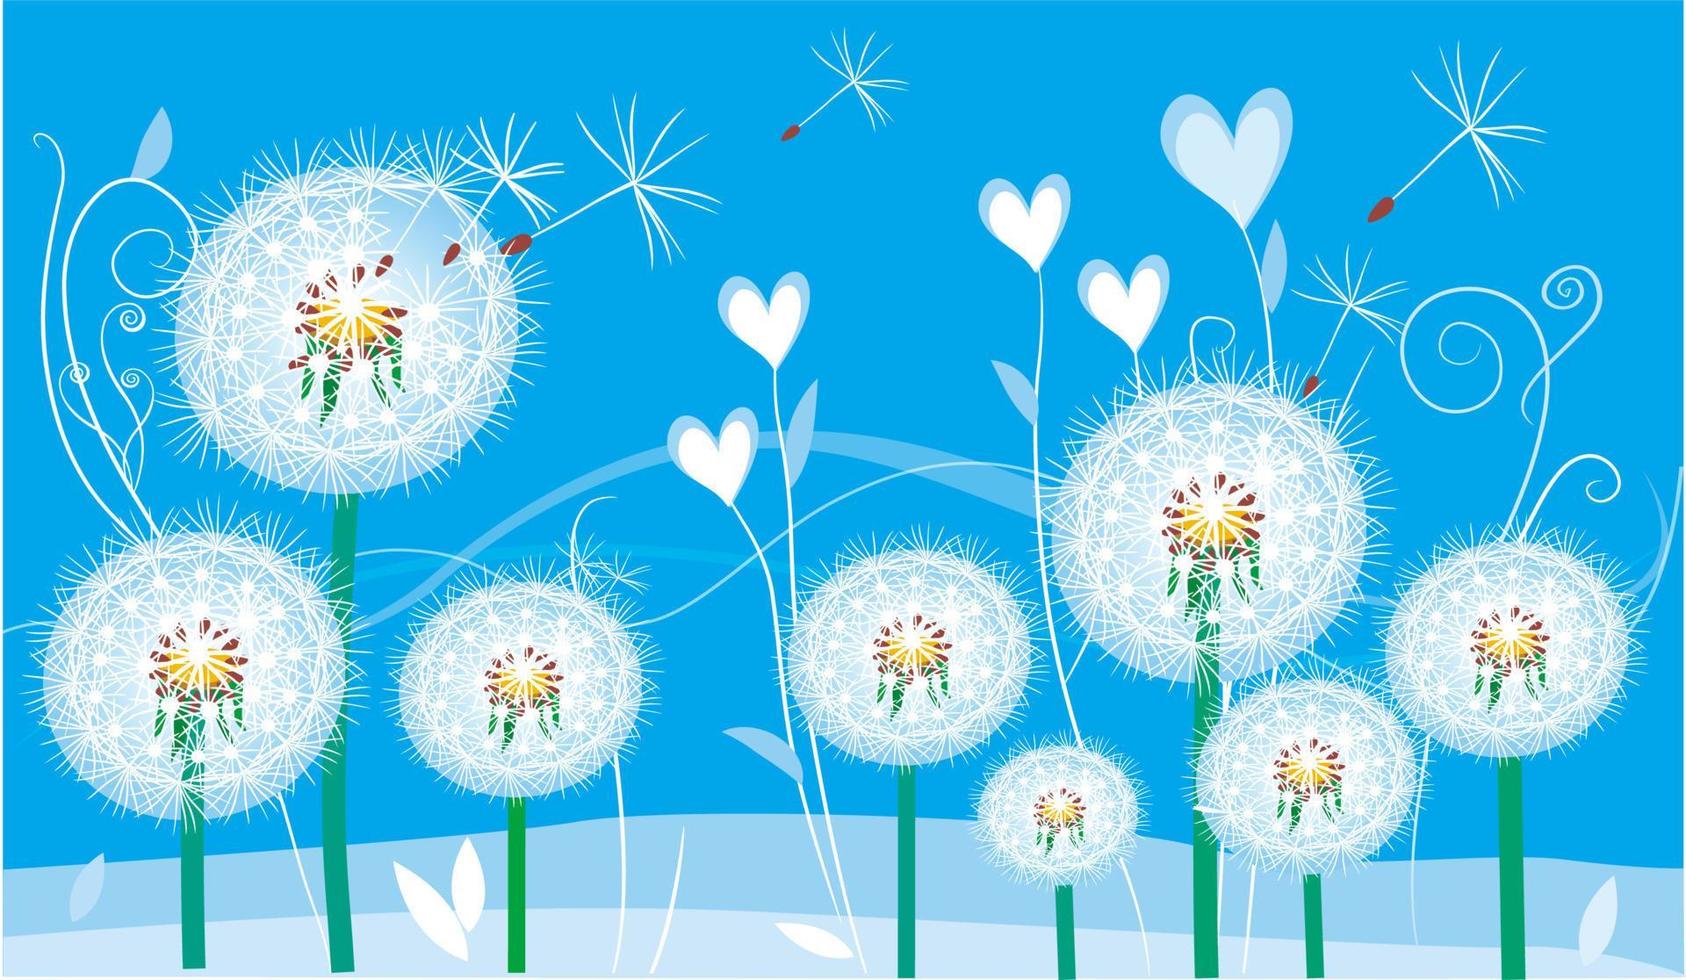 Abstract floral card with dandelions vector